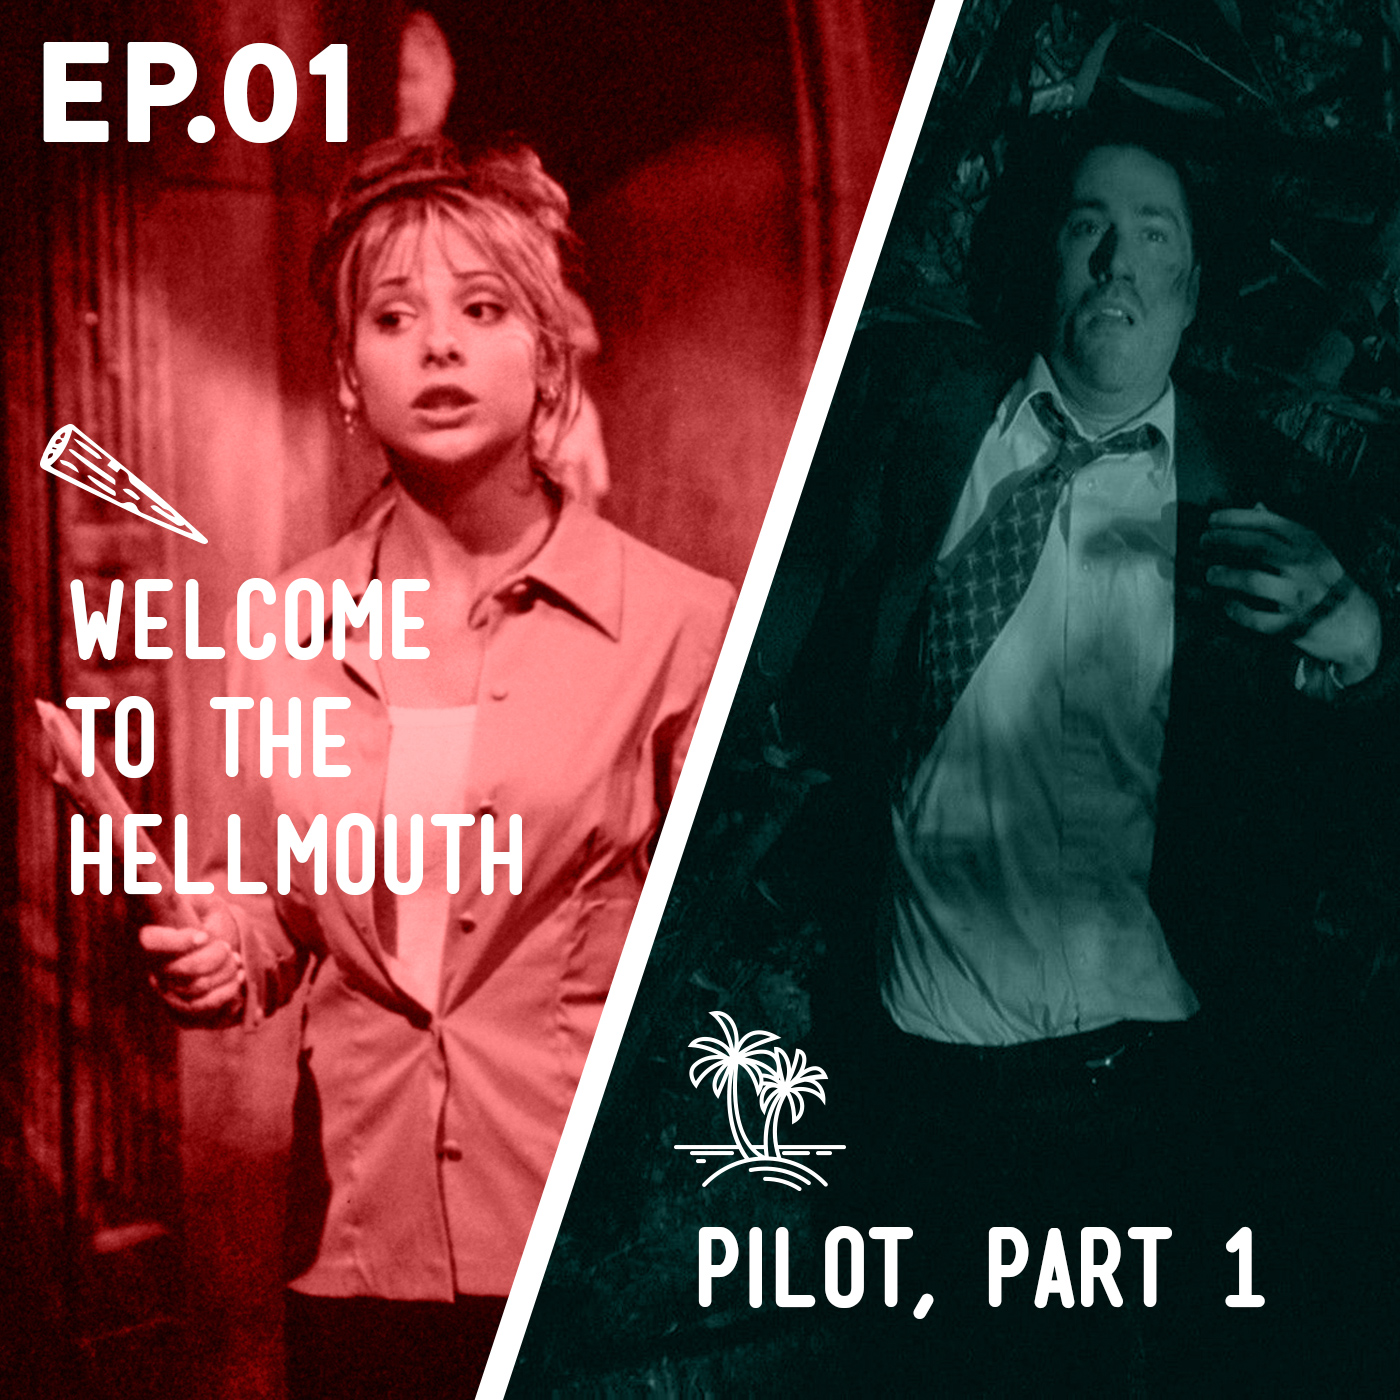 01 - Welcome to the Hellmouth / Pilot: Part 1